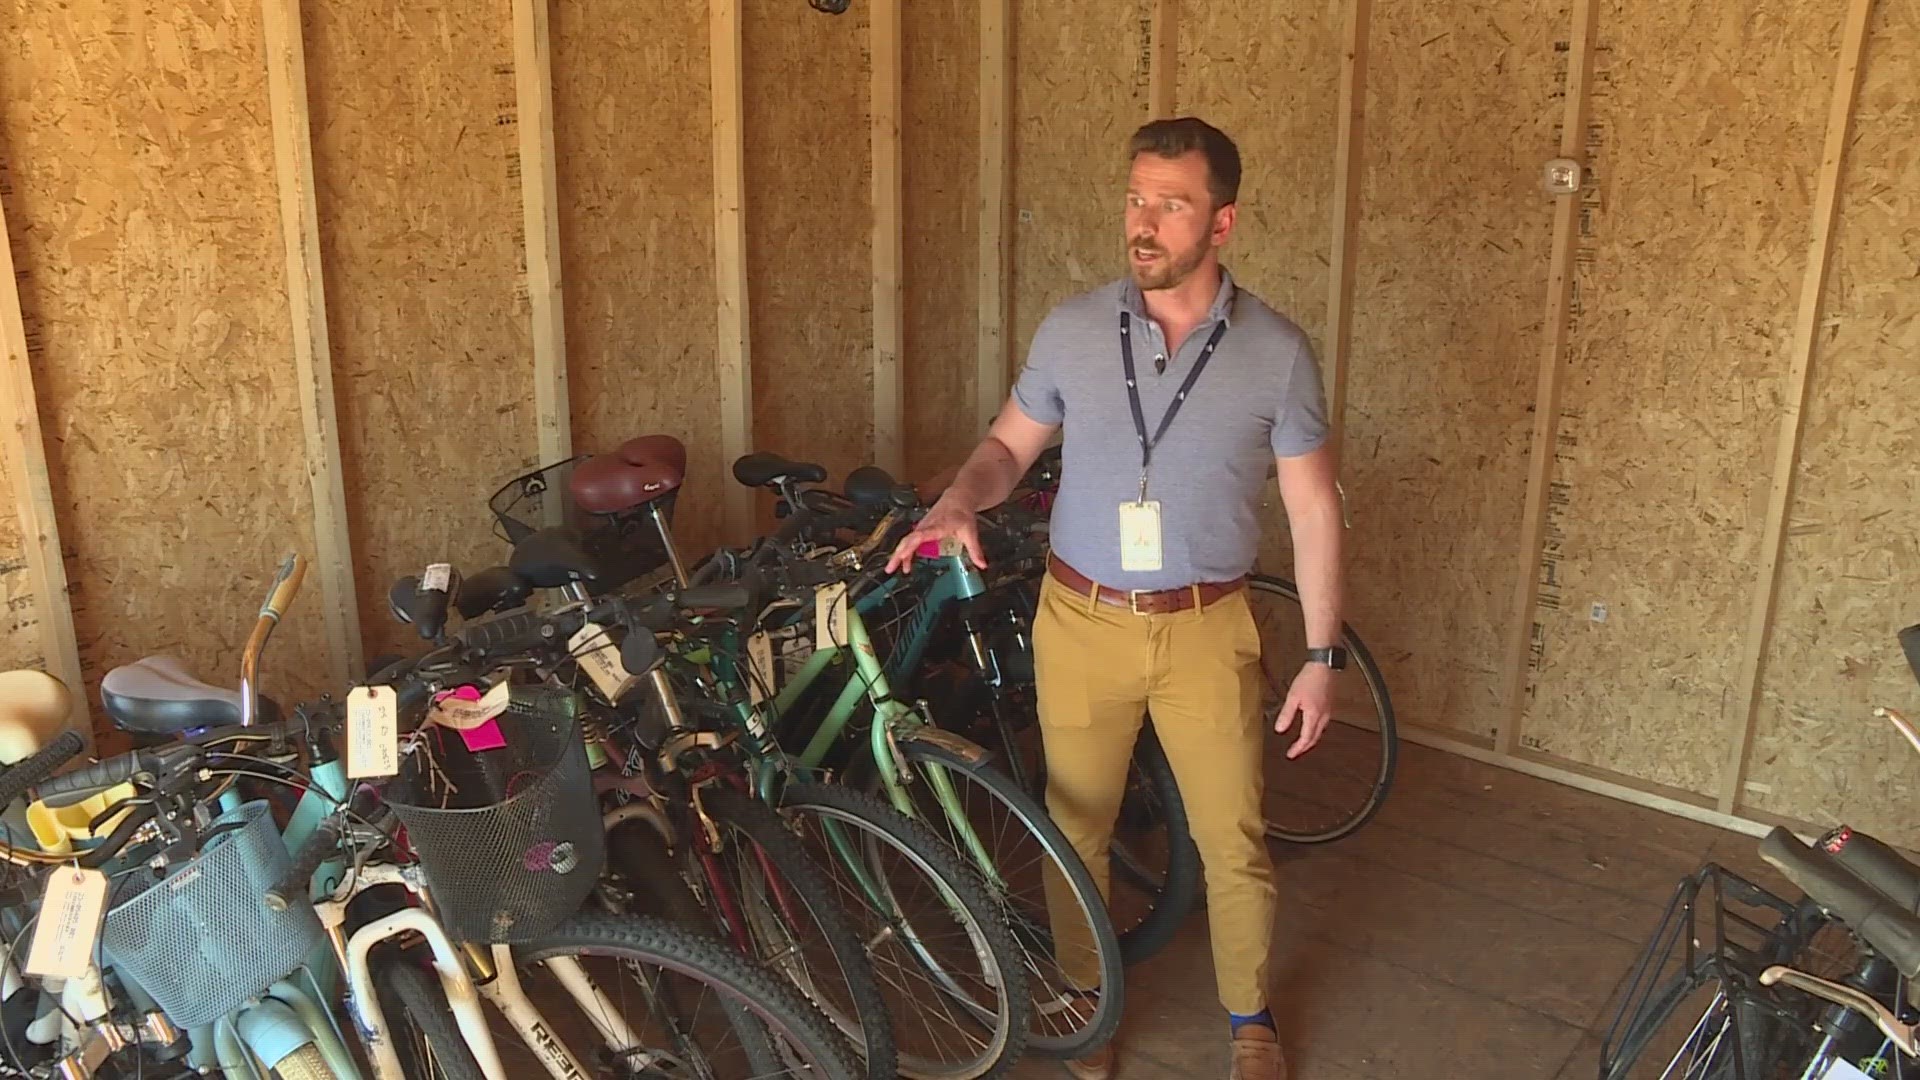 Wheat Ridge Police are working to reconnect owners with the unclaimed bikes in their evidence shed.